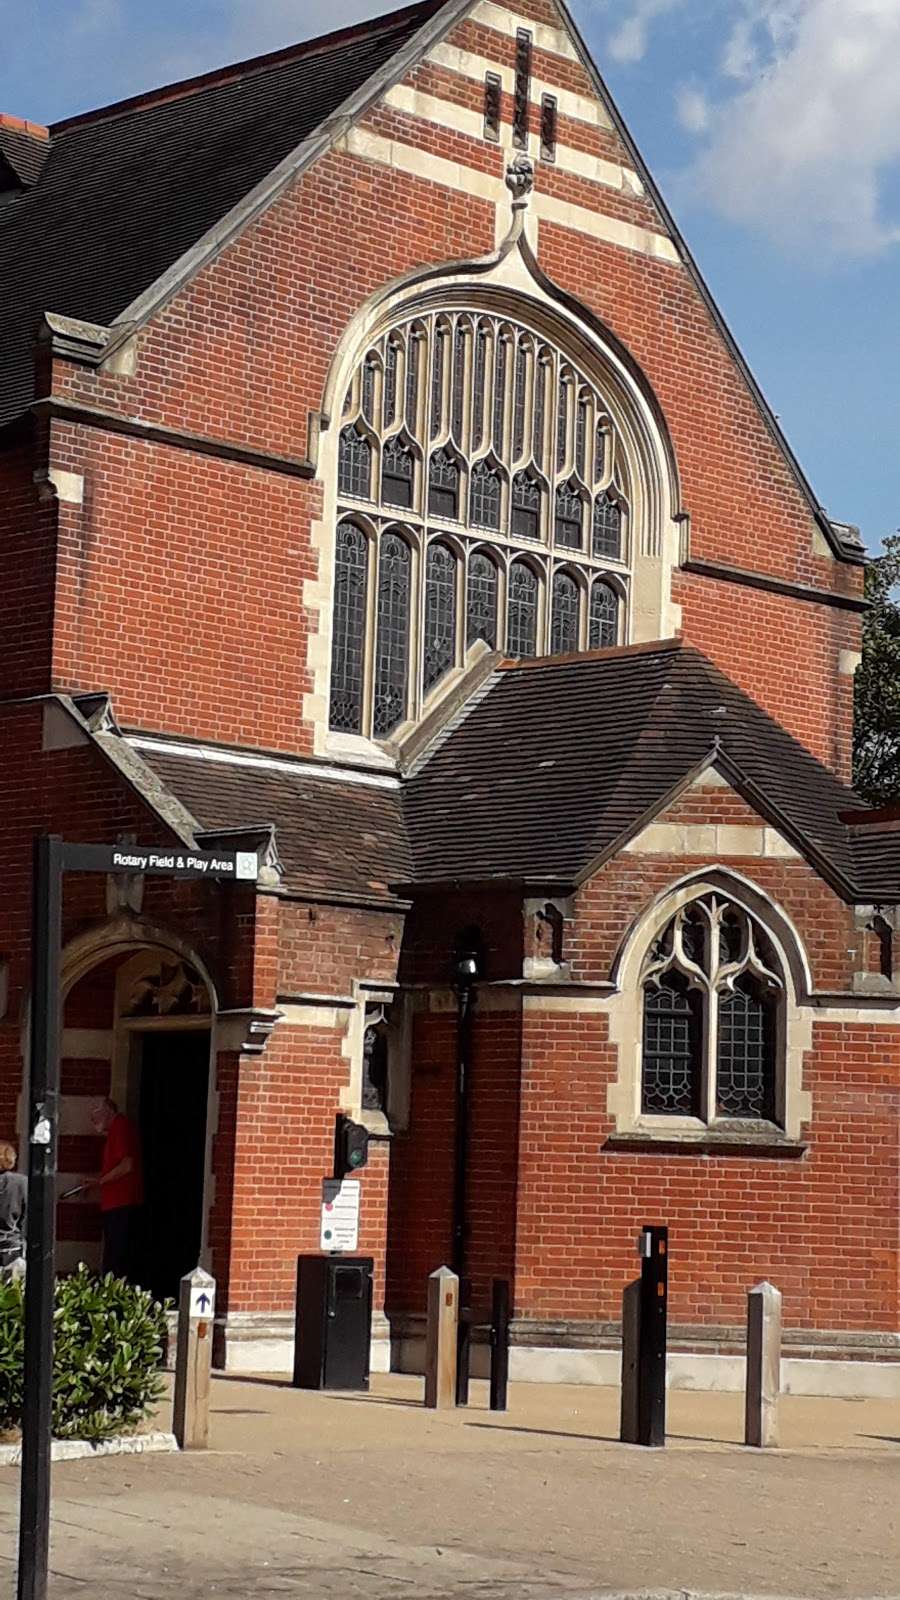 Purley United Reformed Church | 906 Brighton Road, Purley CR8 2LN, UK | Phone: 020 8660 9371